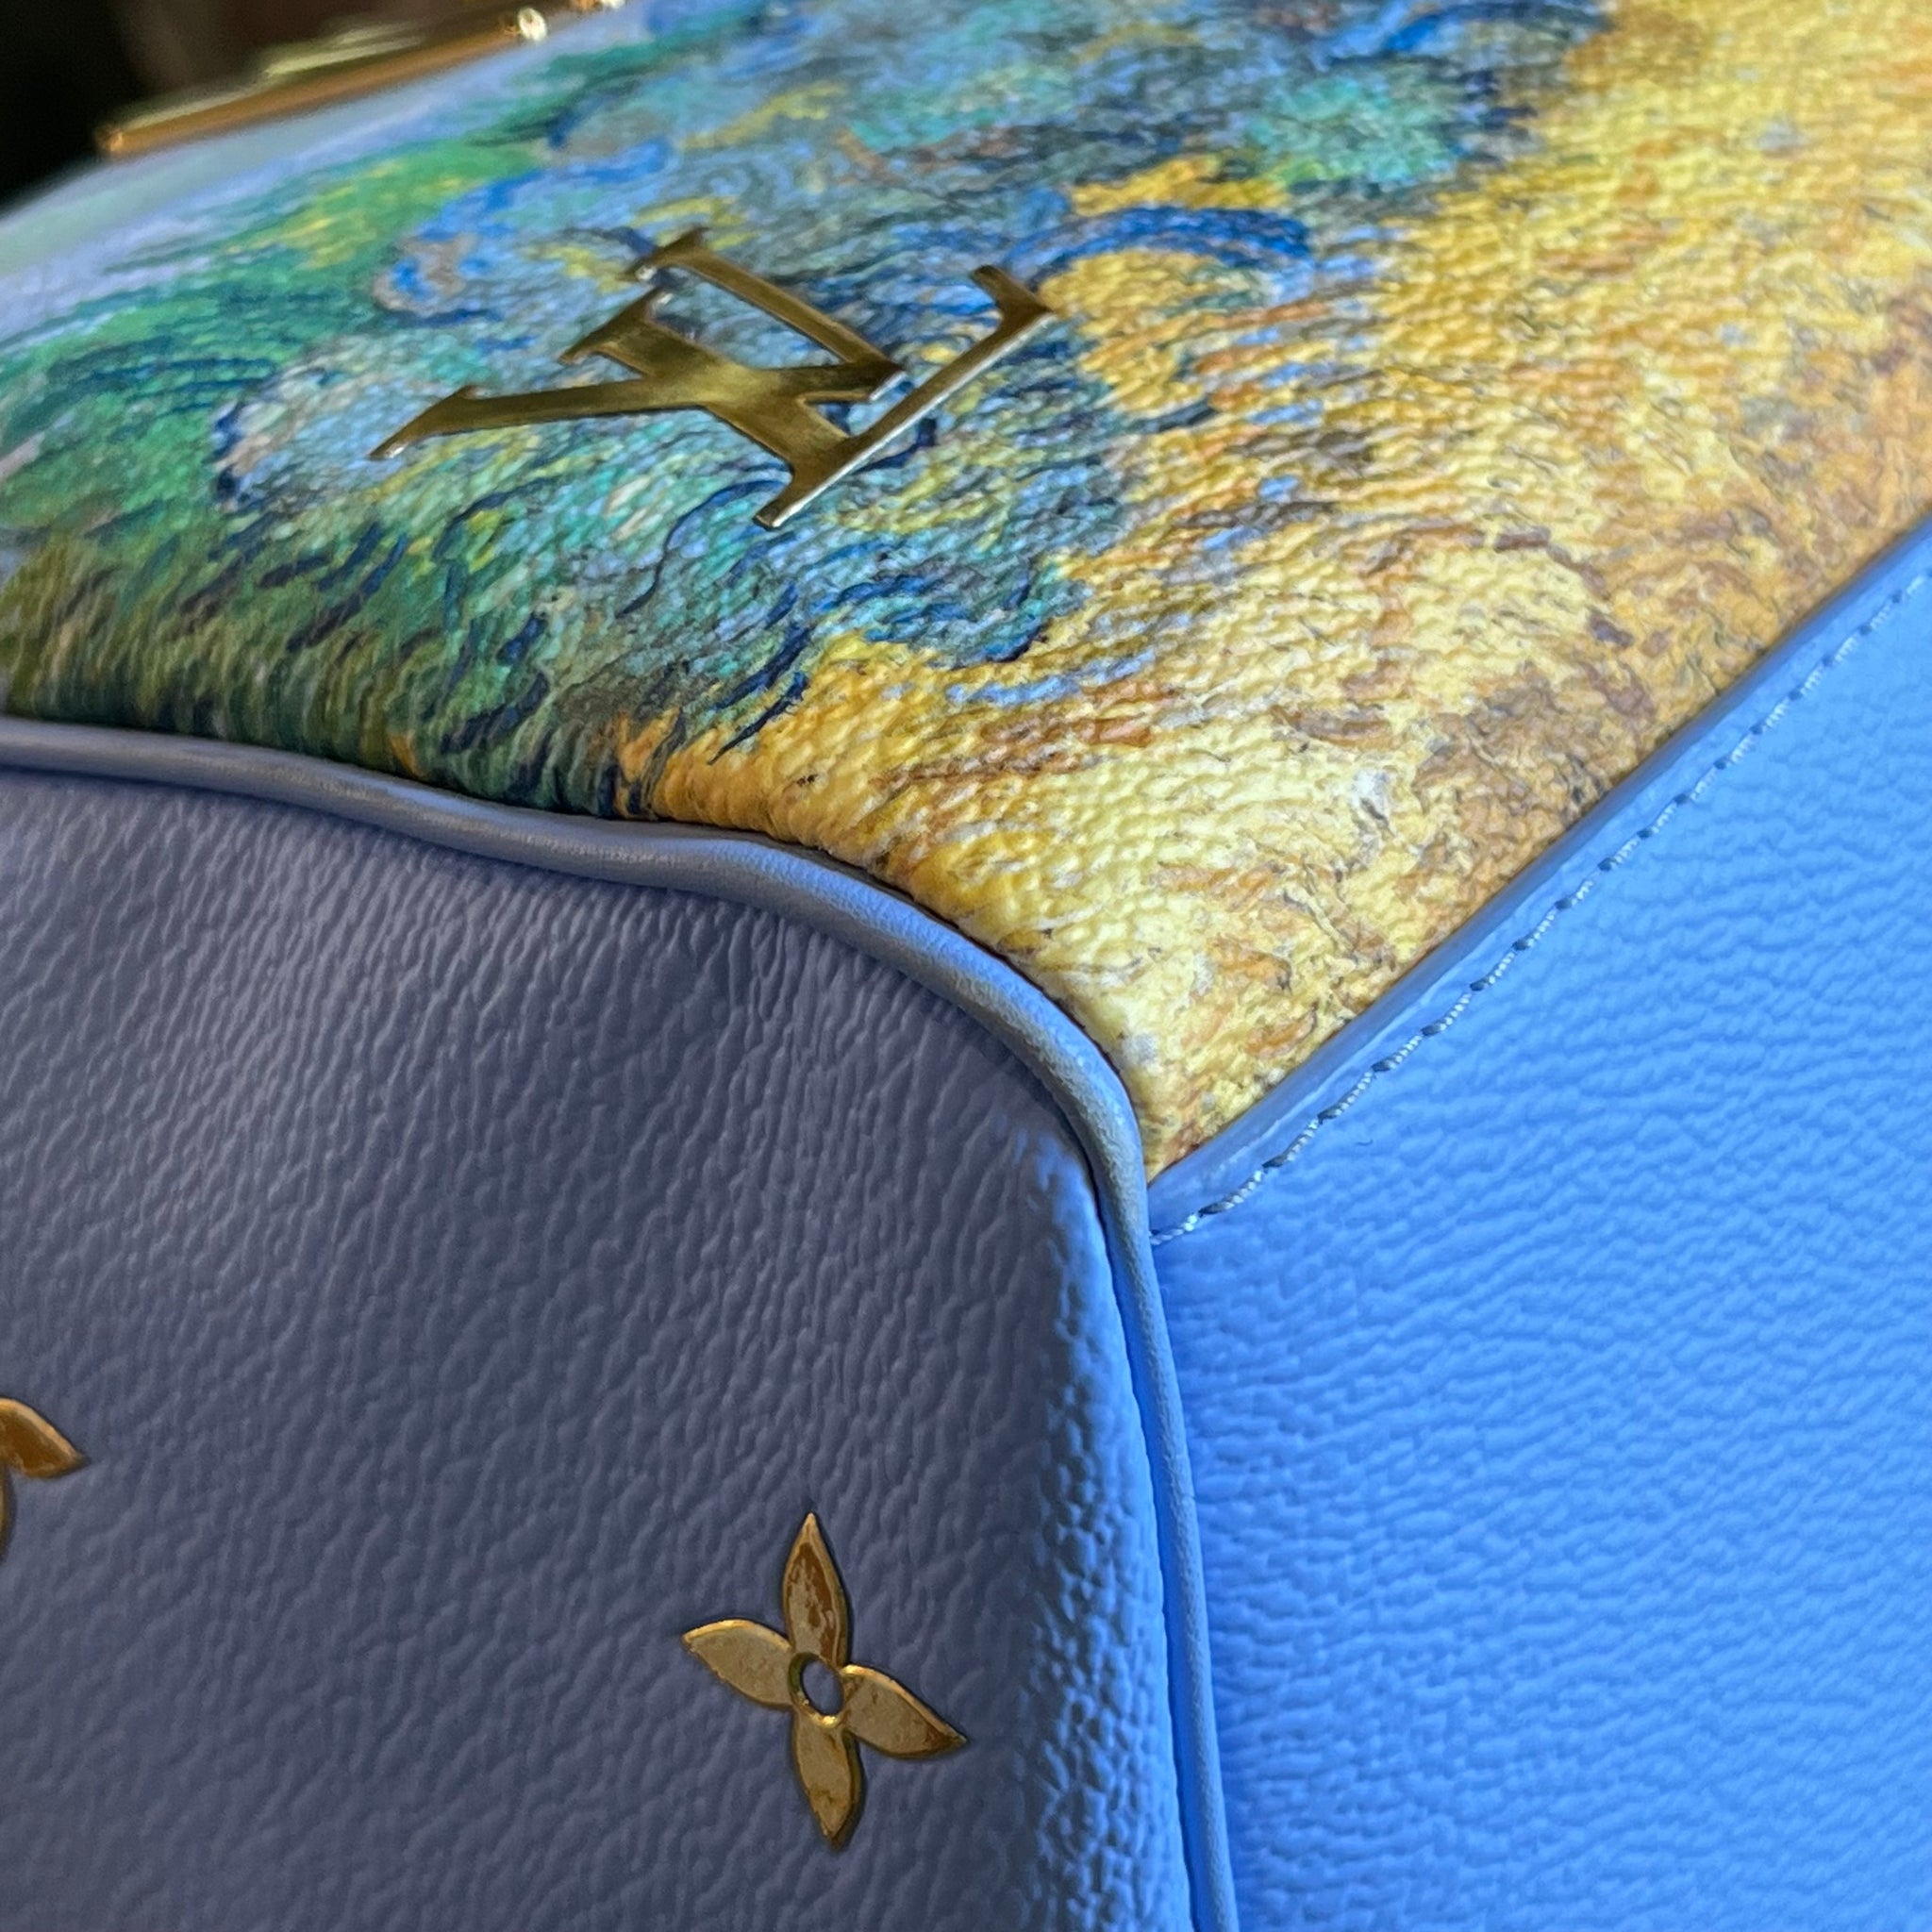 Replicanista - Limited Edition Louis Vuitton Masters Van Gogh by Jeff Koons  #replicanista #lvbag #speedy #masters #vangogh #lvspeedy #louisvuitton  #bagoftheday #limitededition #jeffkoons